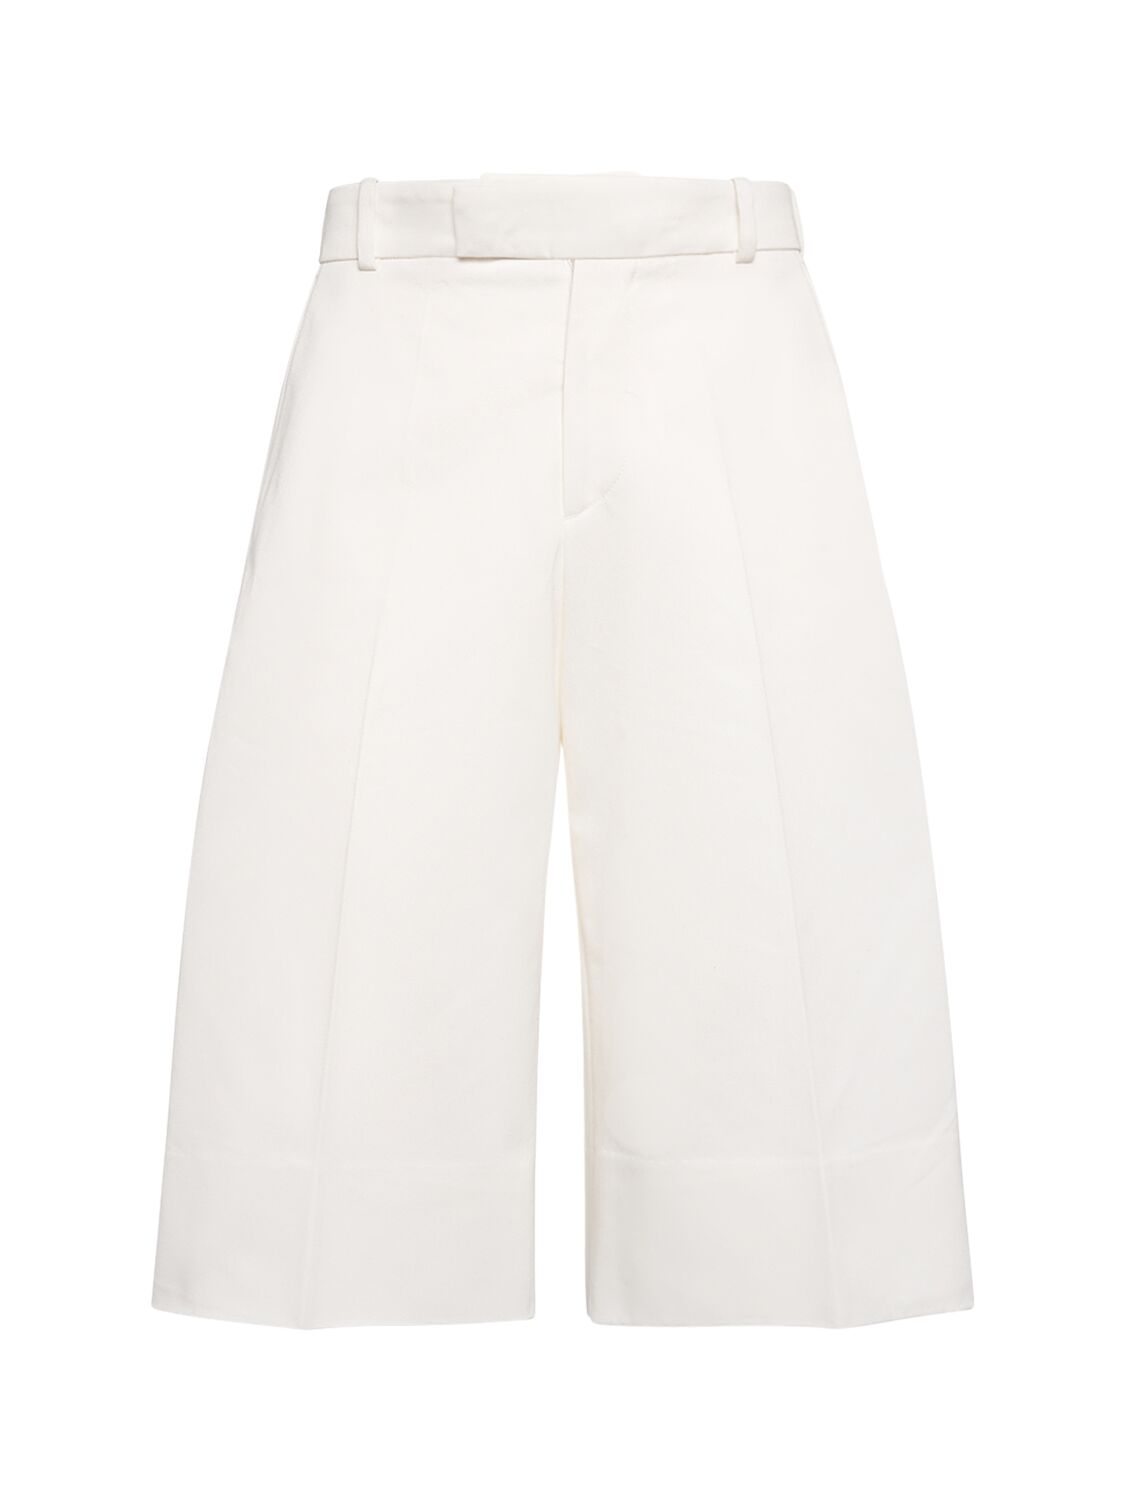 Alexander Mcqueen Pleated Baggy Shorts In Ivory